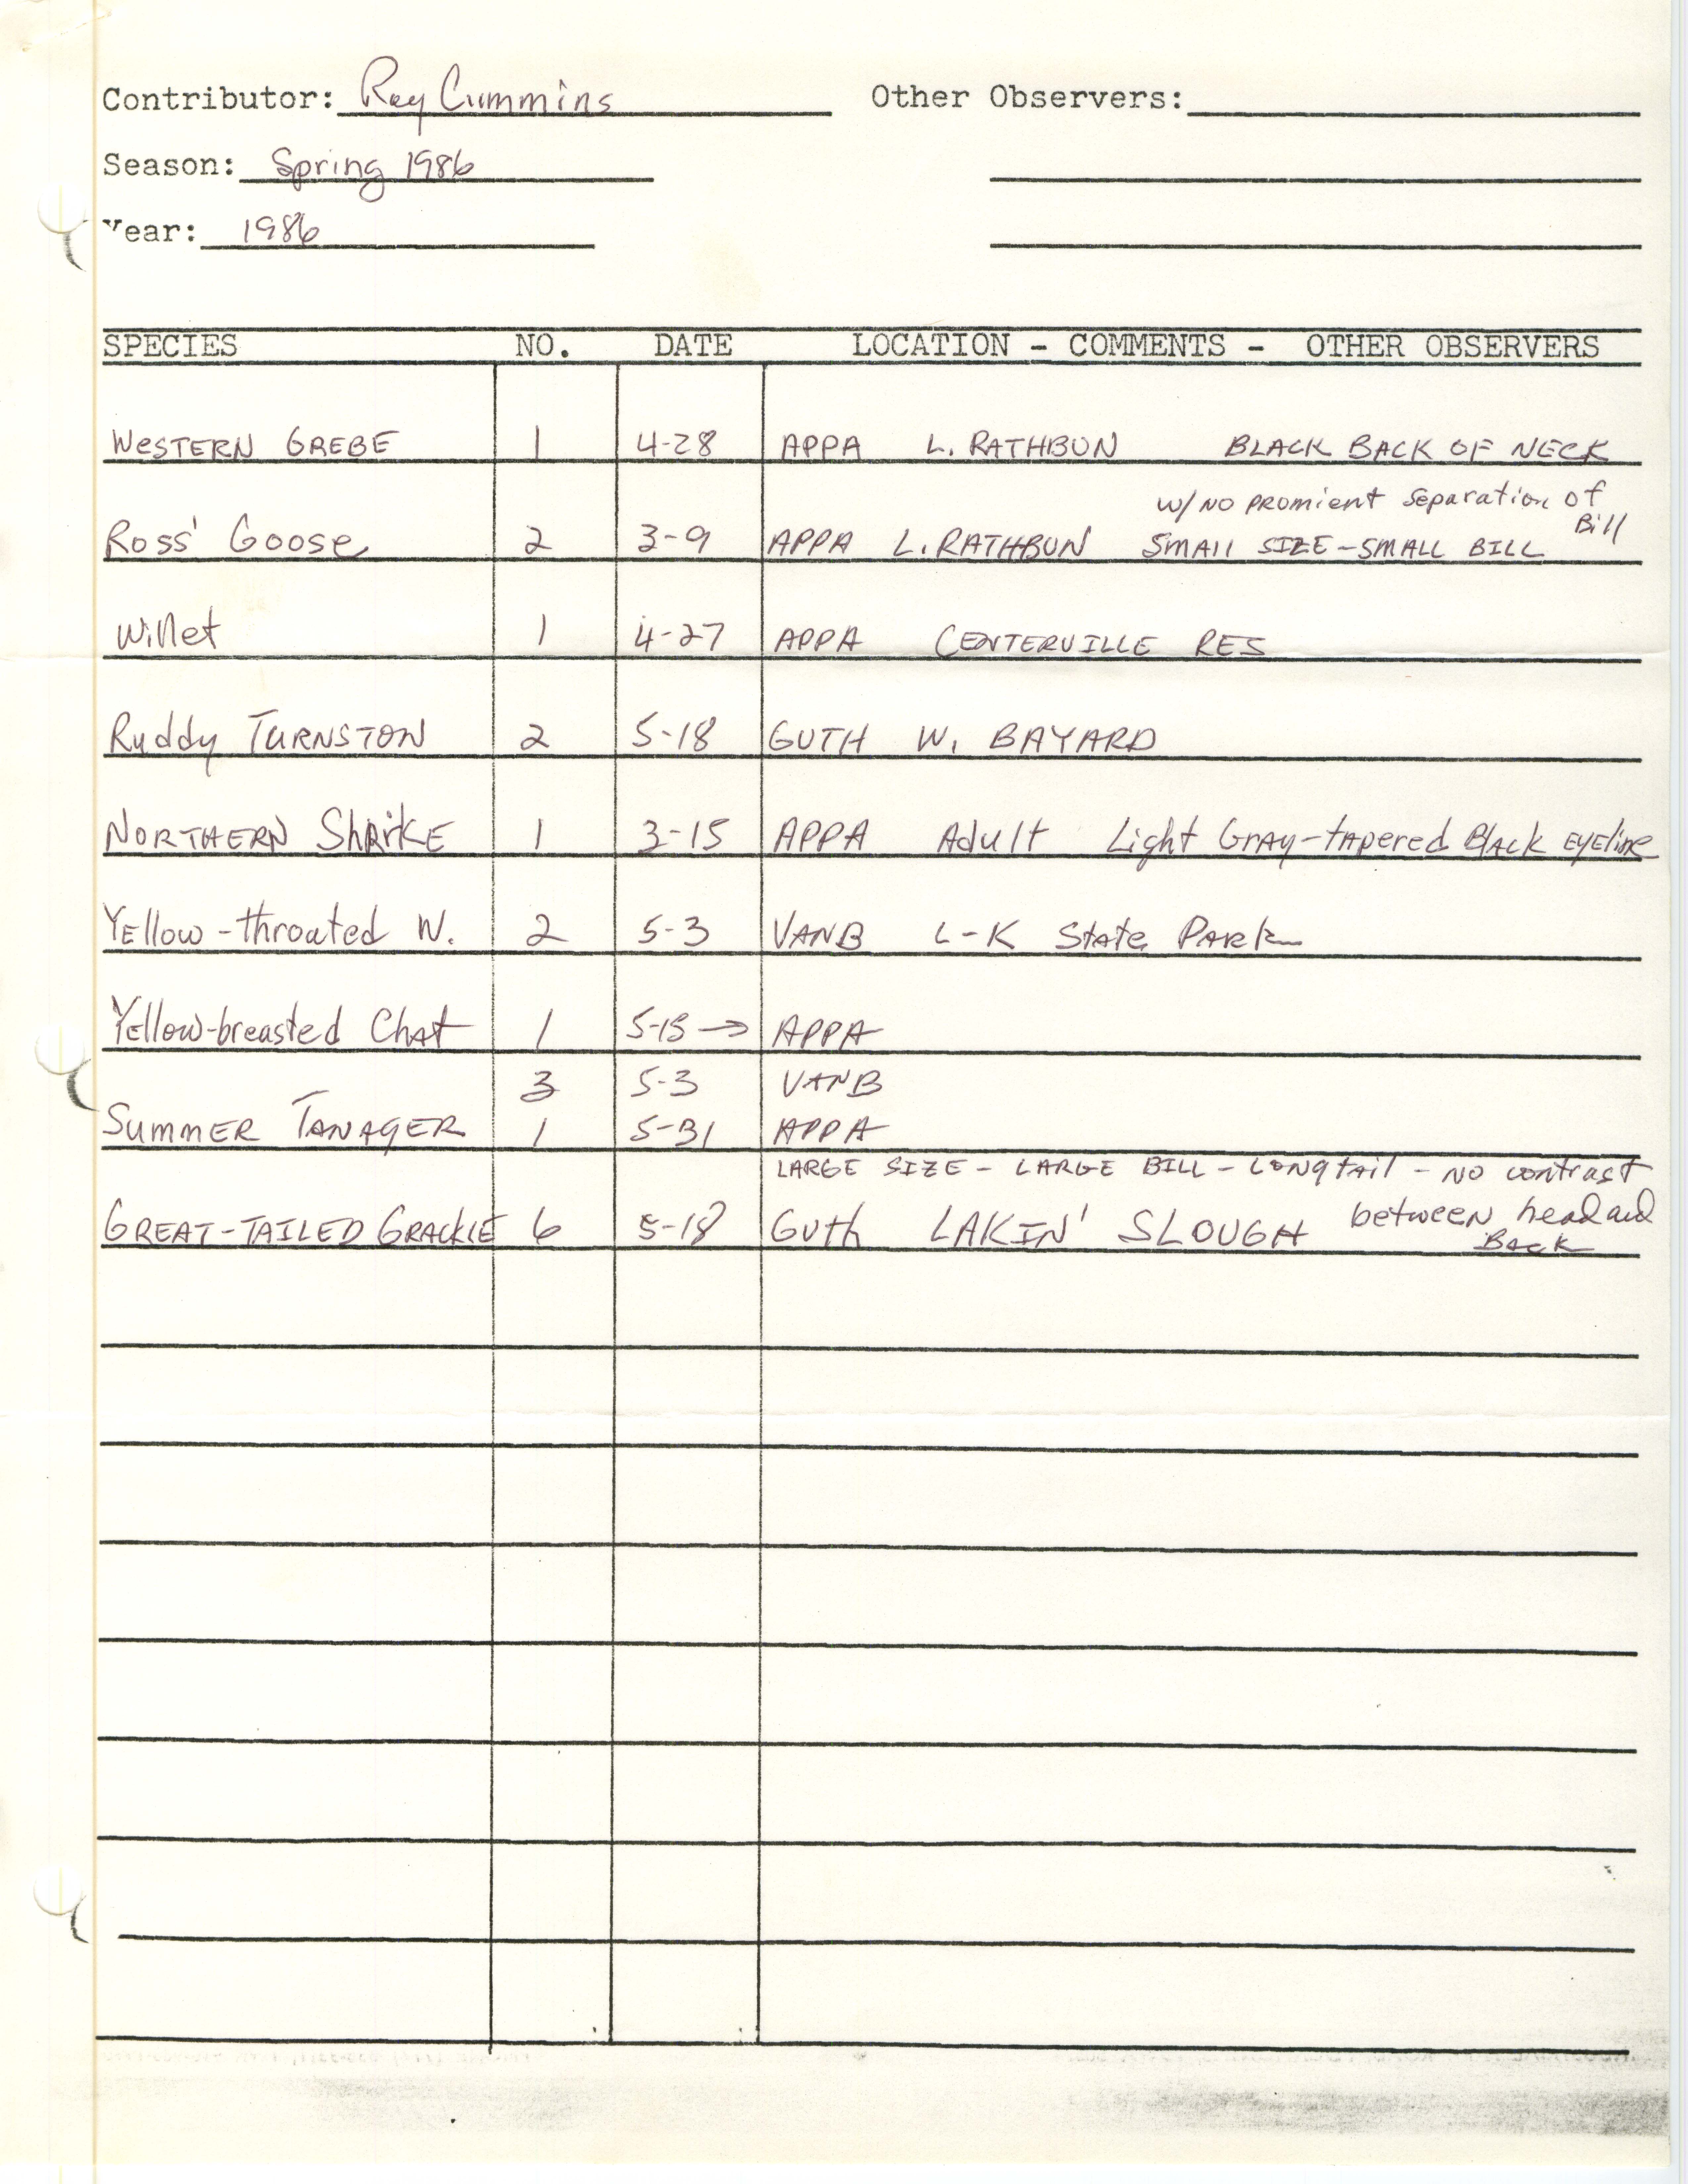 Annotated bird sighting list for Spring 1986 compiled by Ray Cummins